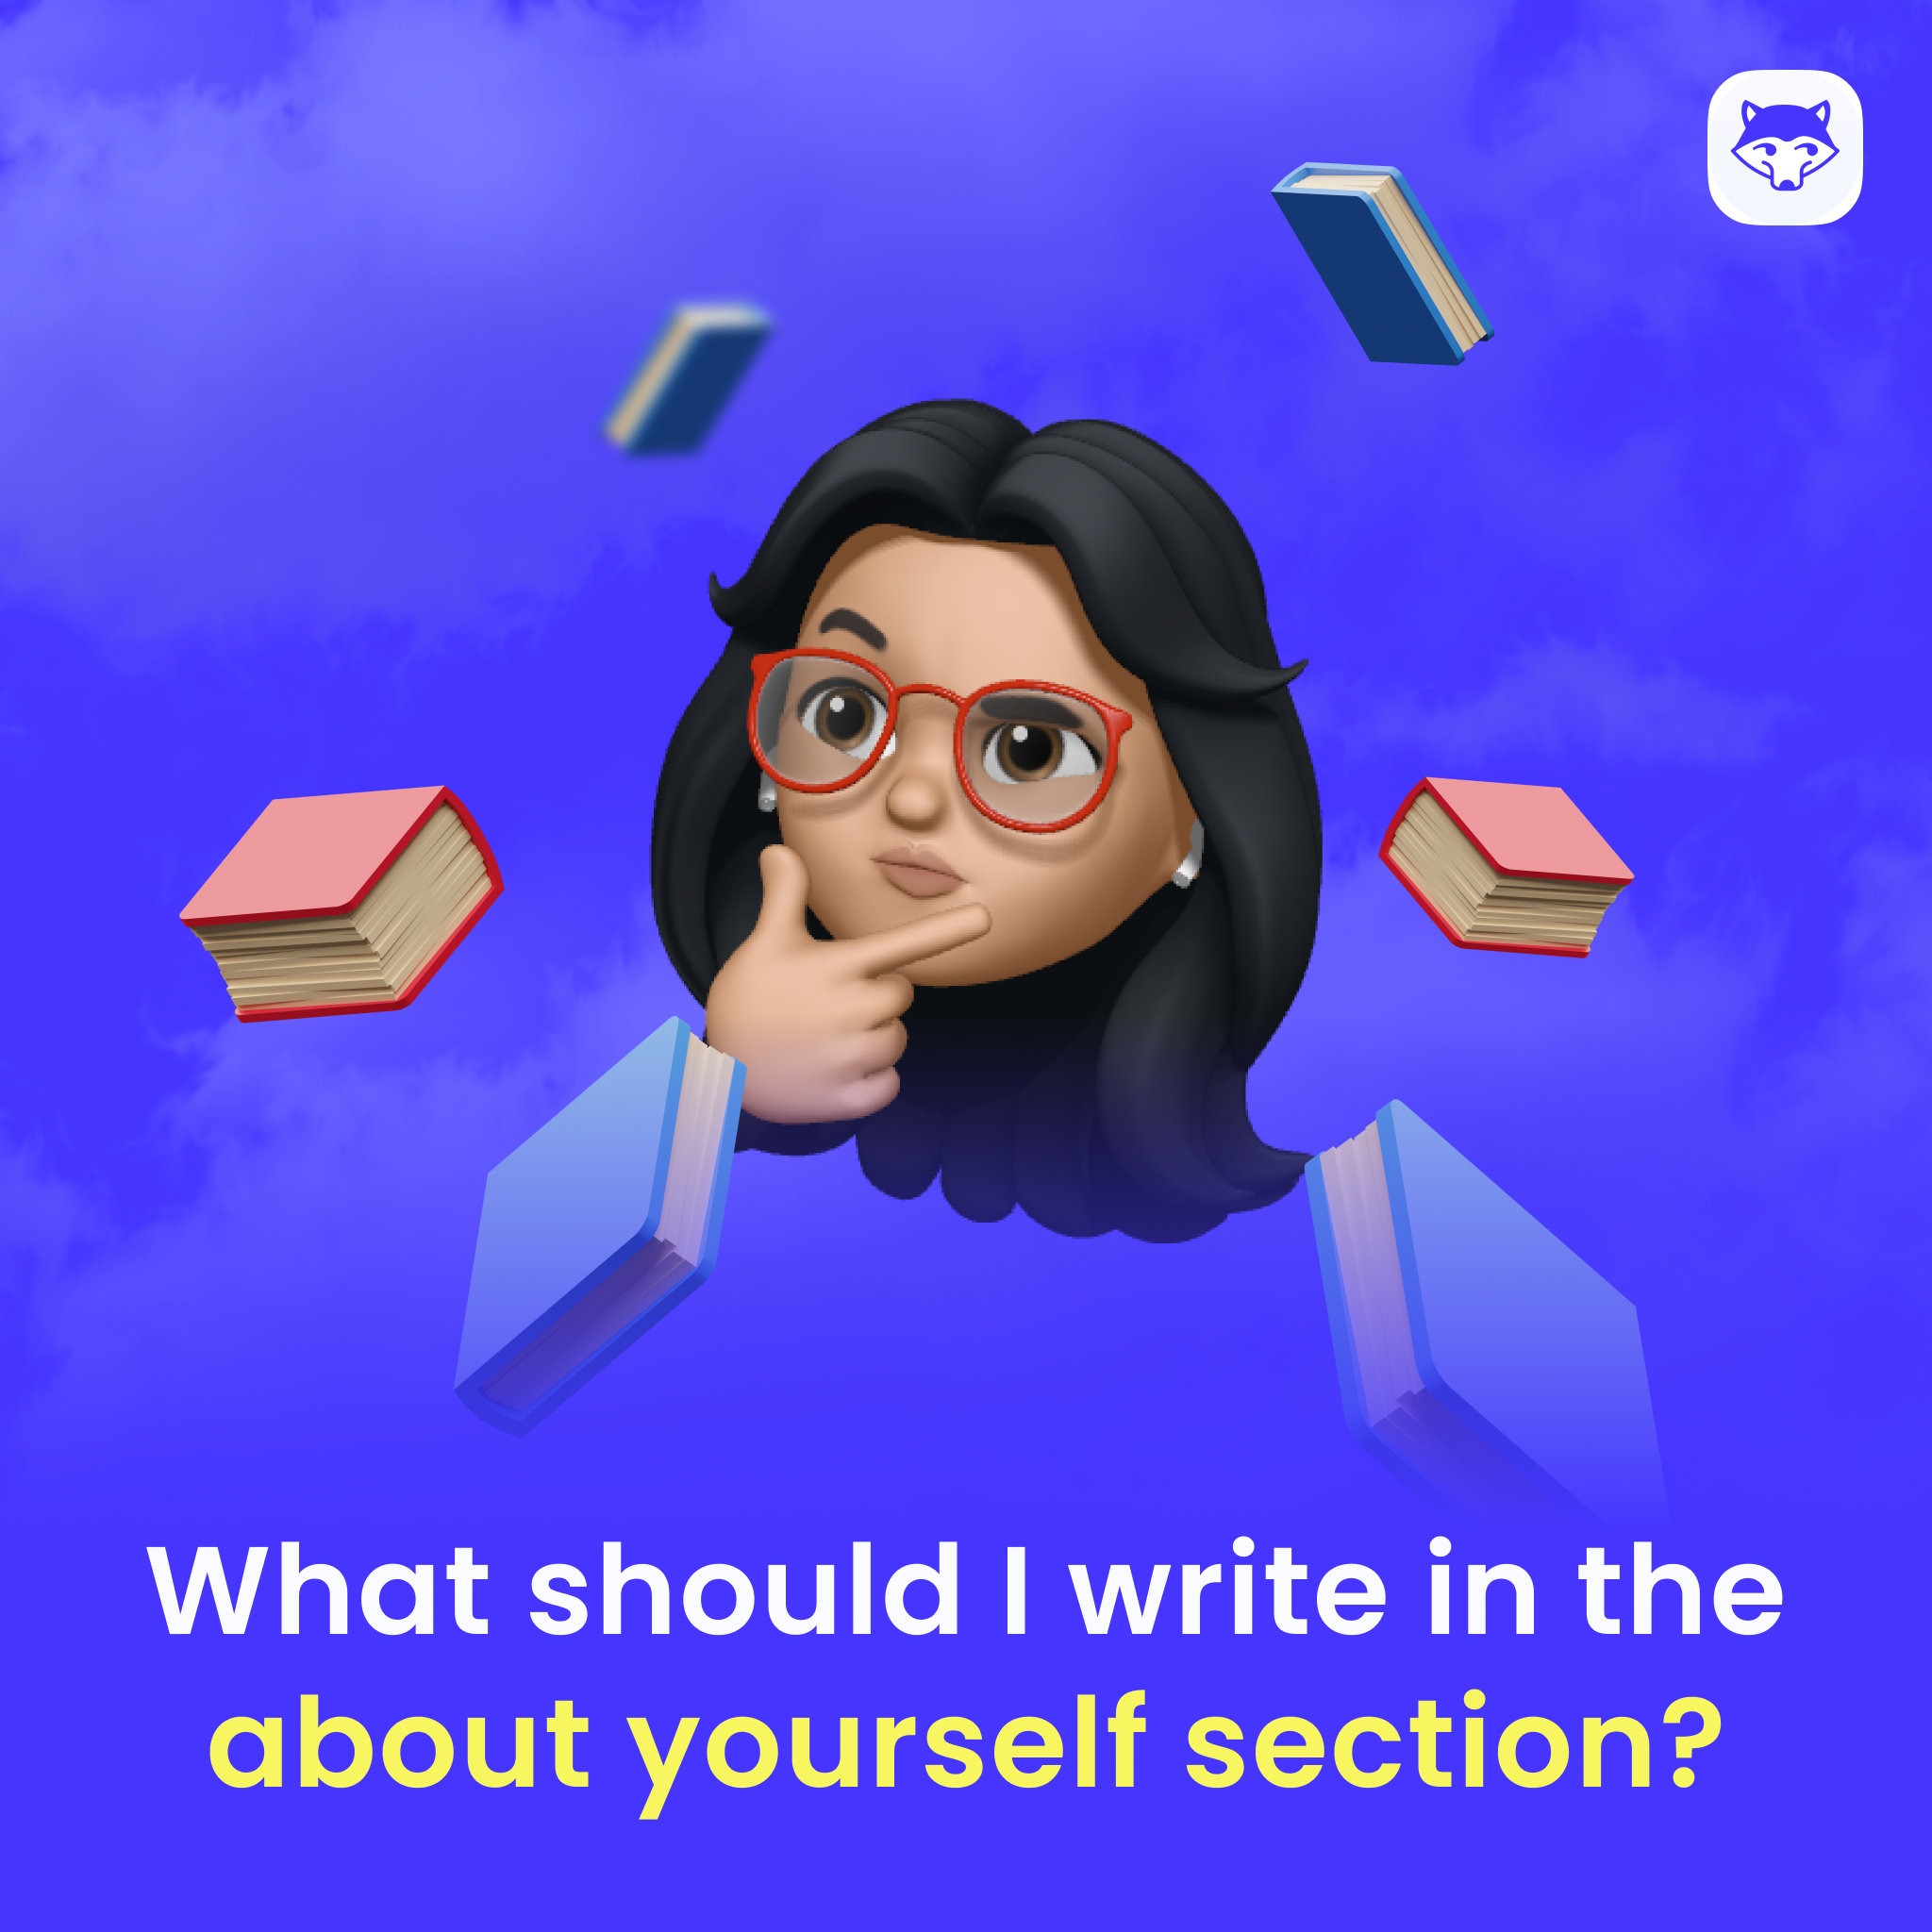 What Should I Write In The ‘About Yourself’ Section?